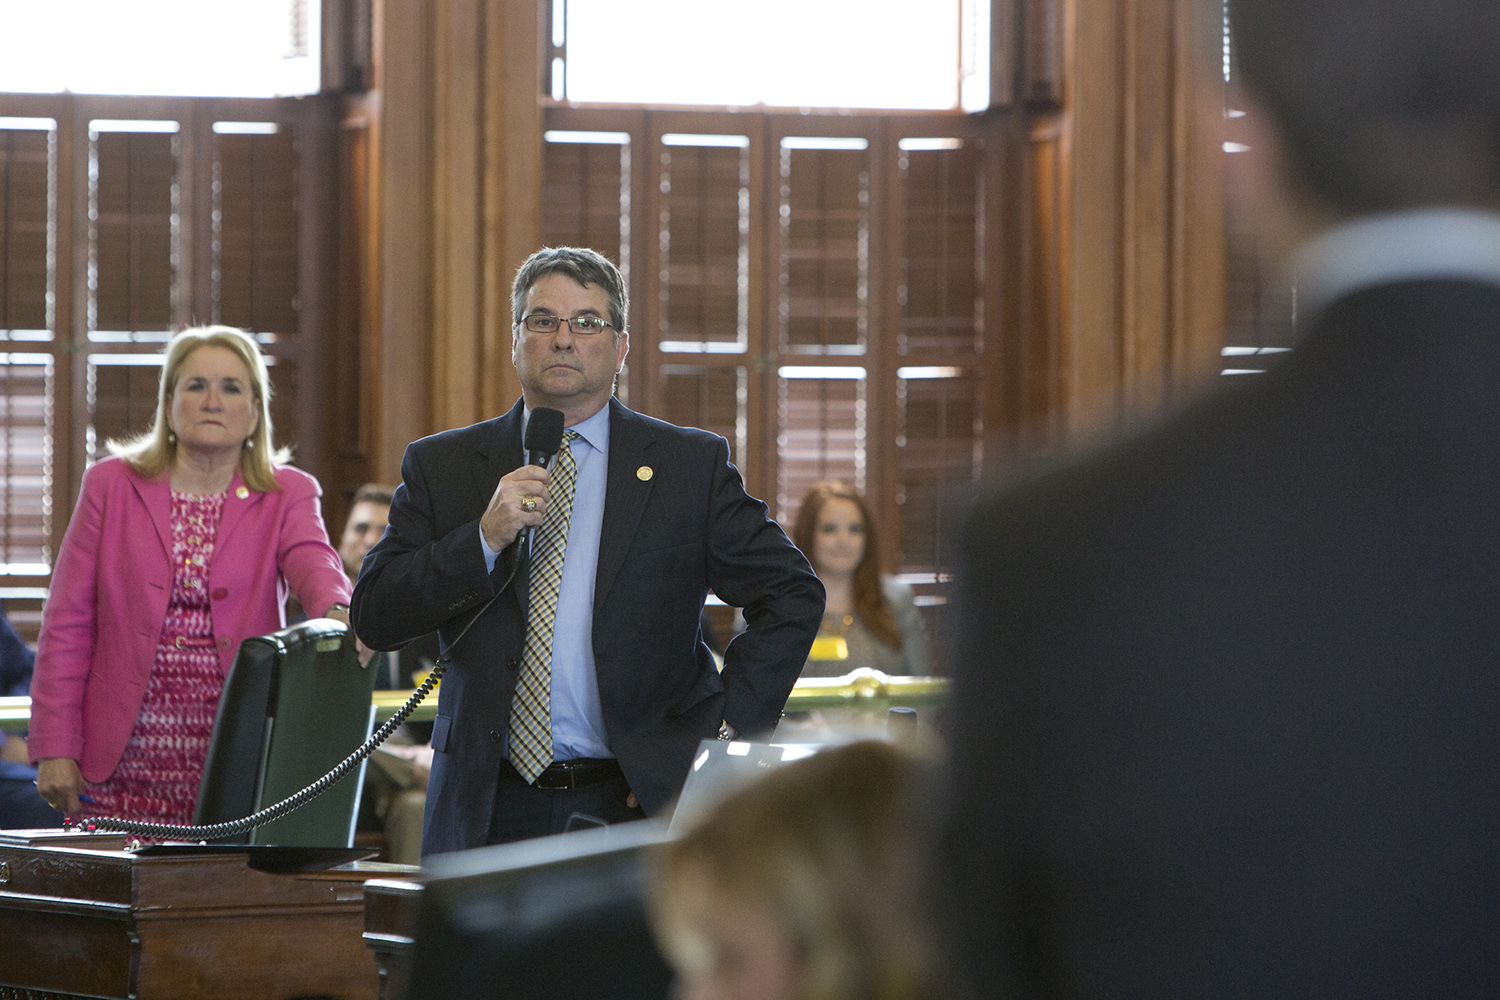 State Sen. Sylvia Garcia, D-Houston, looks on as Sen. Charles Perry, R-Lubbock answers questions about Senate Bill 4 on May 3, 2017.